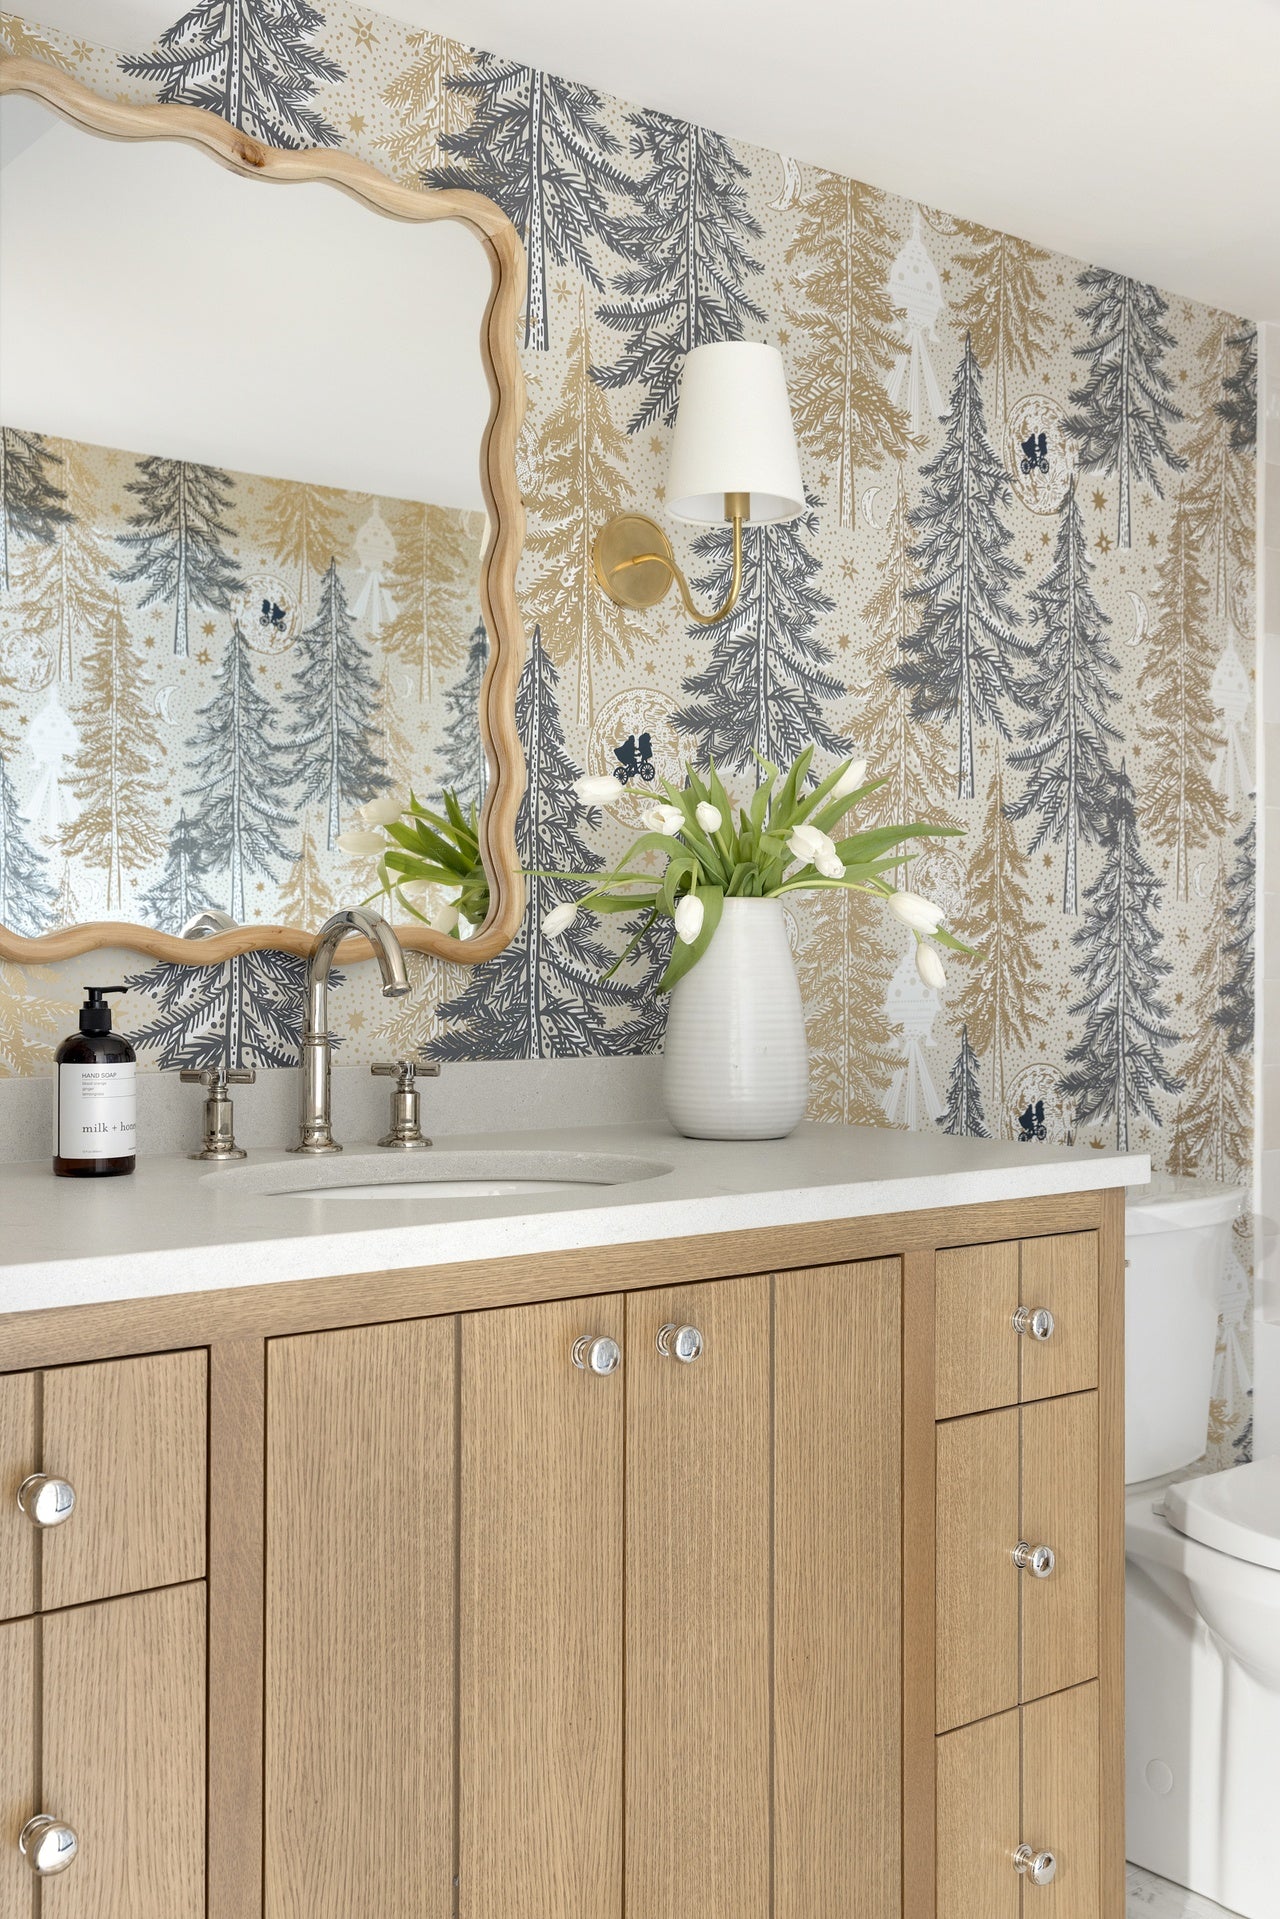 Be Good Wallpaper in a bathroom designed by Katie Kath